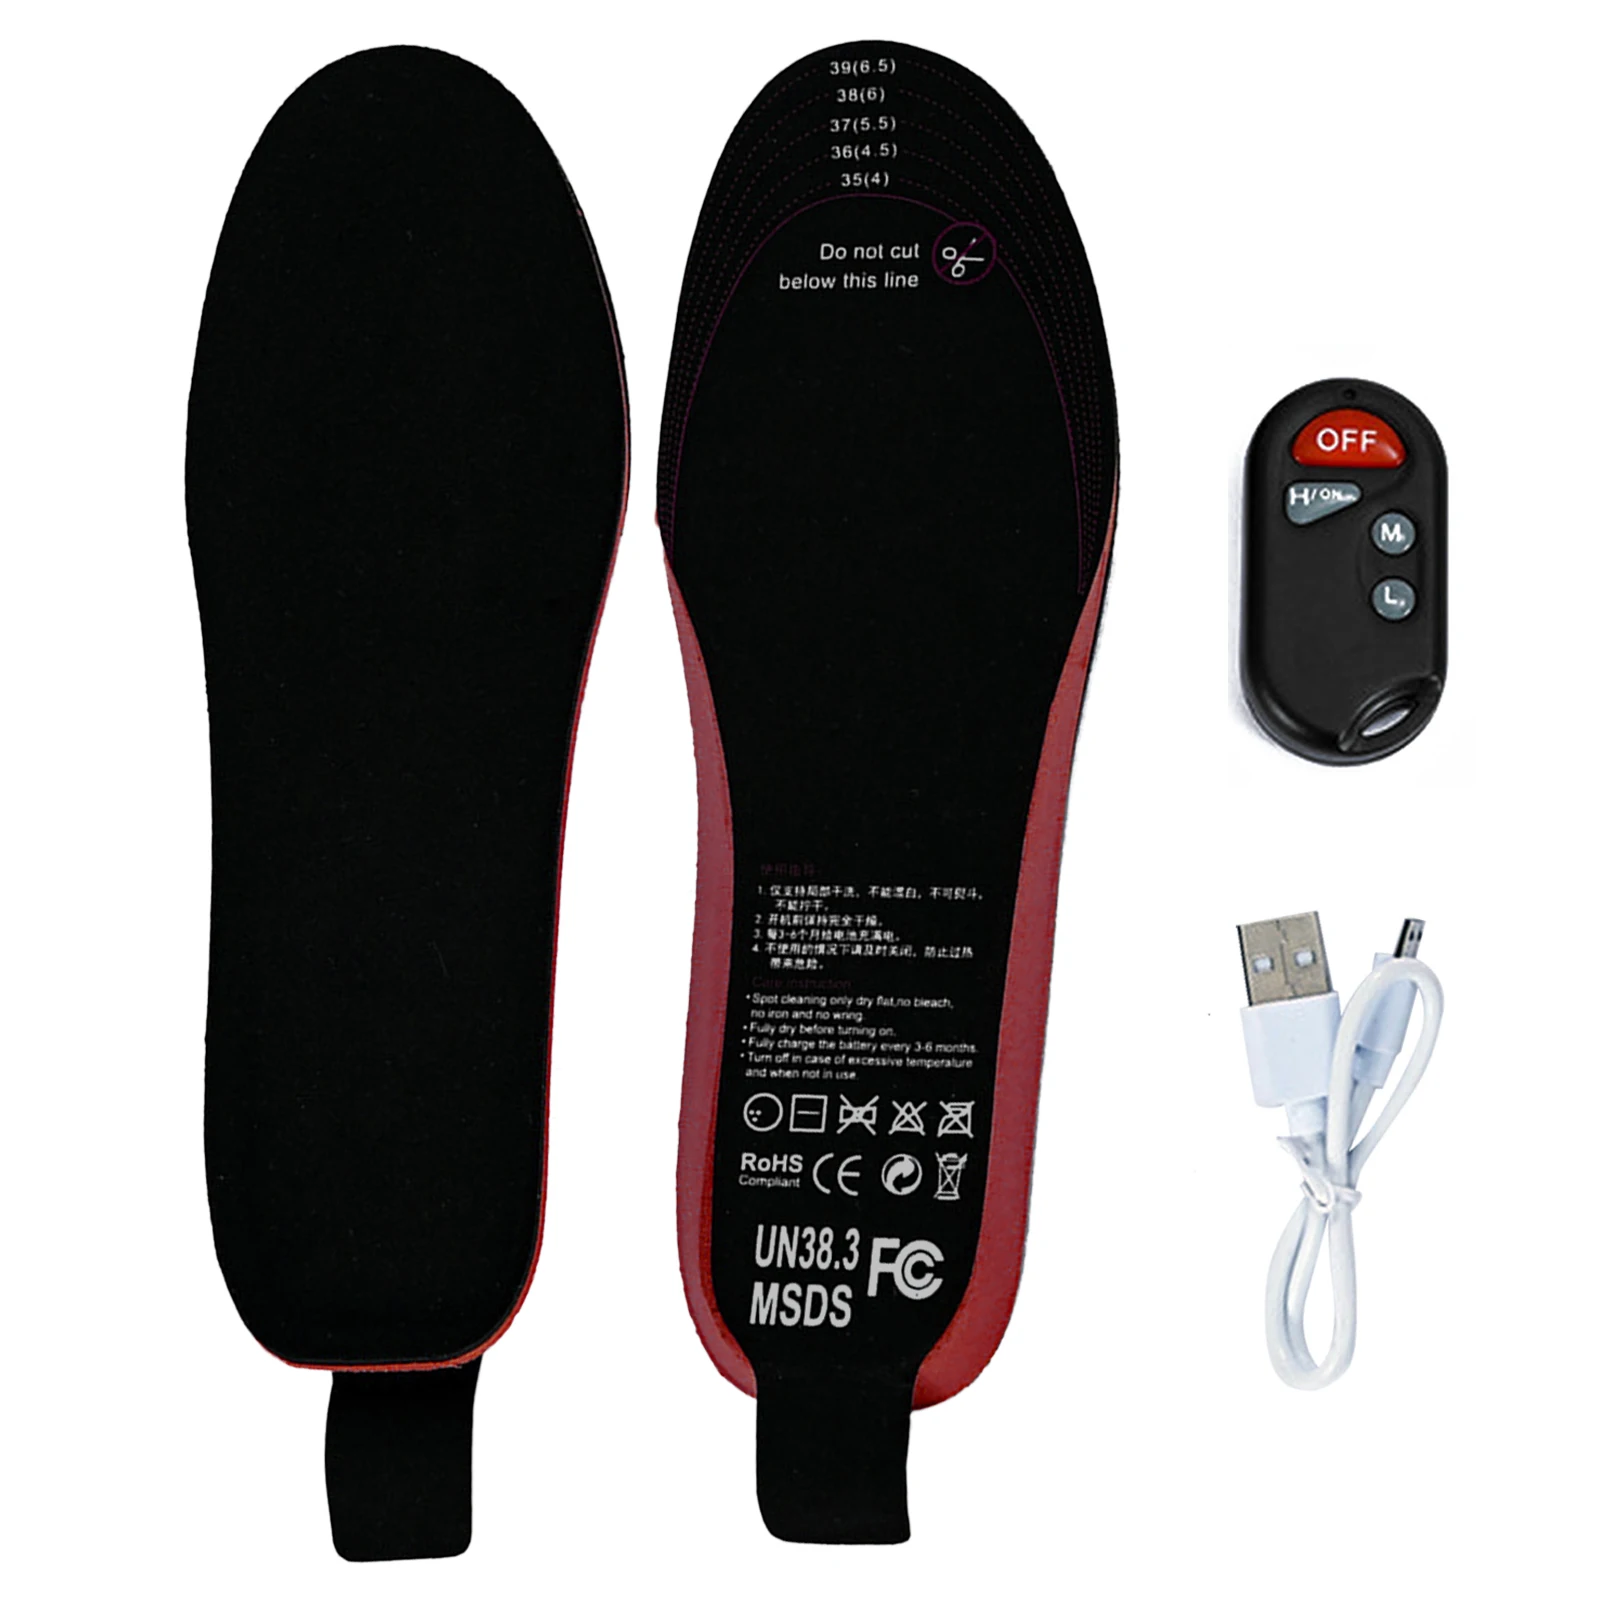 New 35-46 Size 2100mAh Heating Insoles with LED Remote Control Men Women Sport EVA Shoes Pads Outdoor Skiing Heated Insoles 3.7V 3